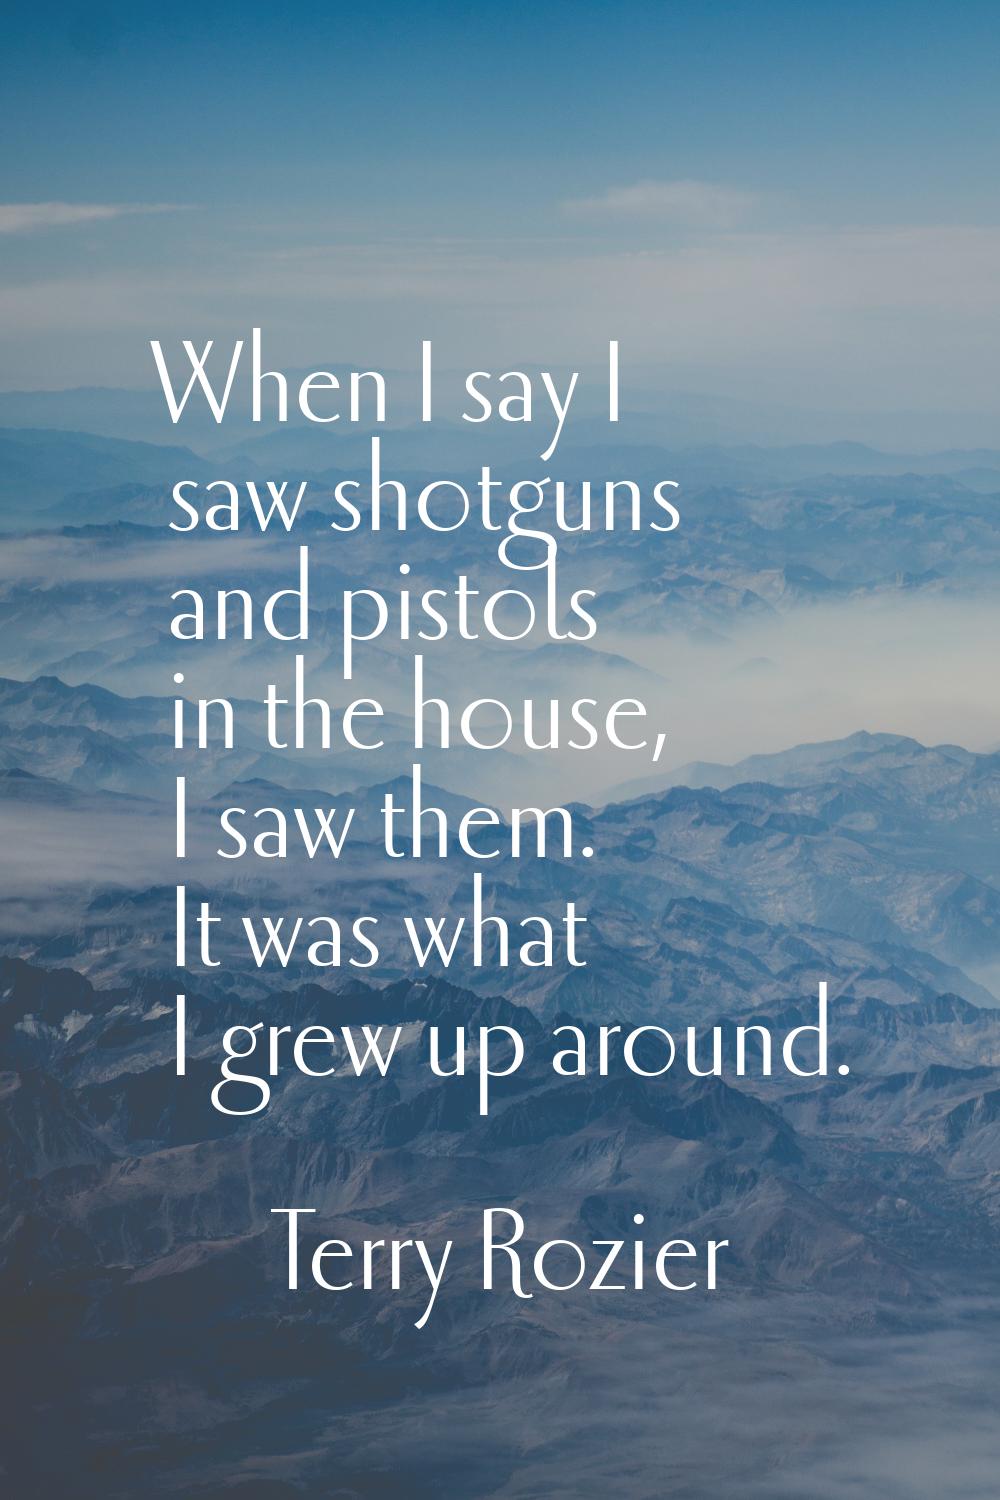 When I say I saw shotguns and pistols in the house, I saw them. It was what I grew up around.